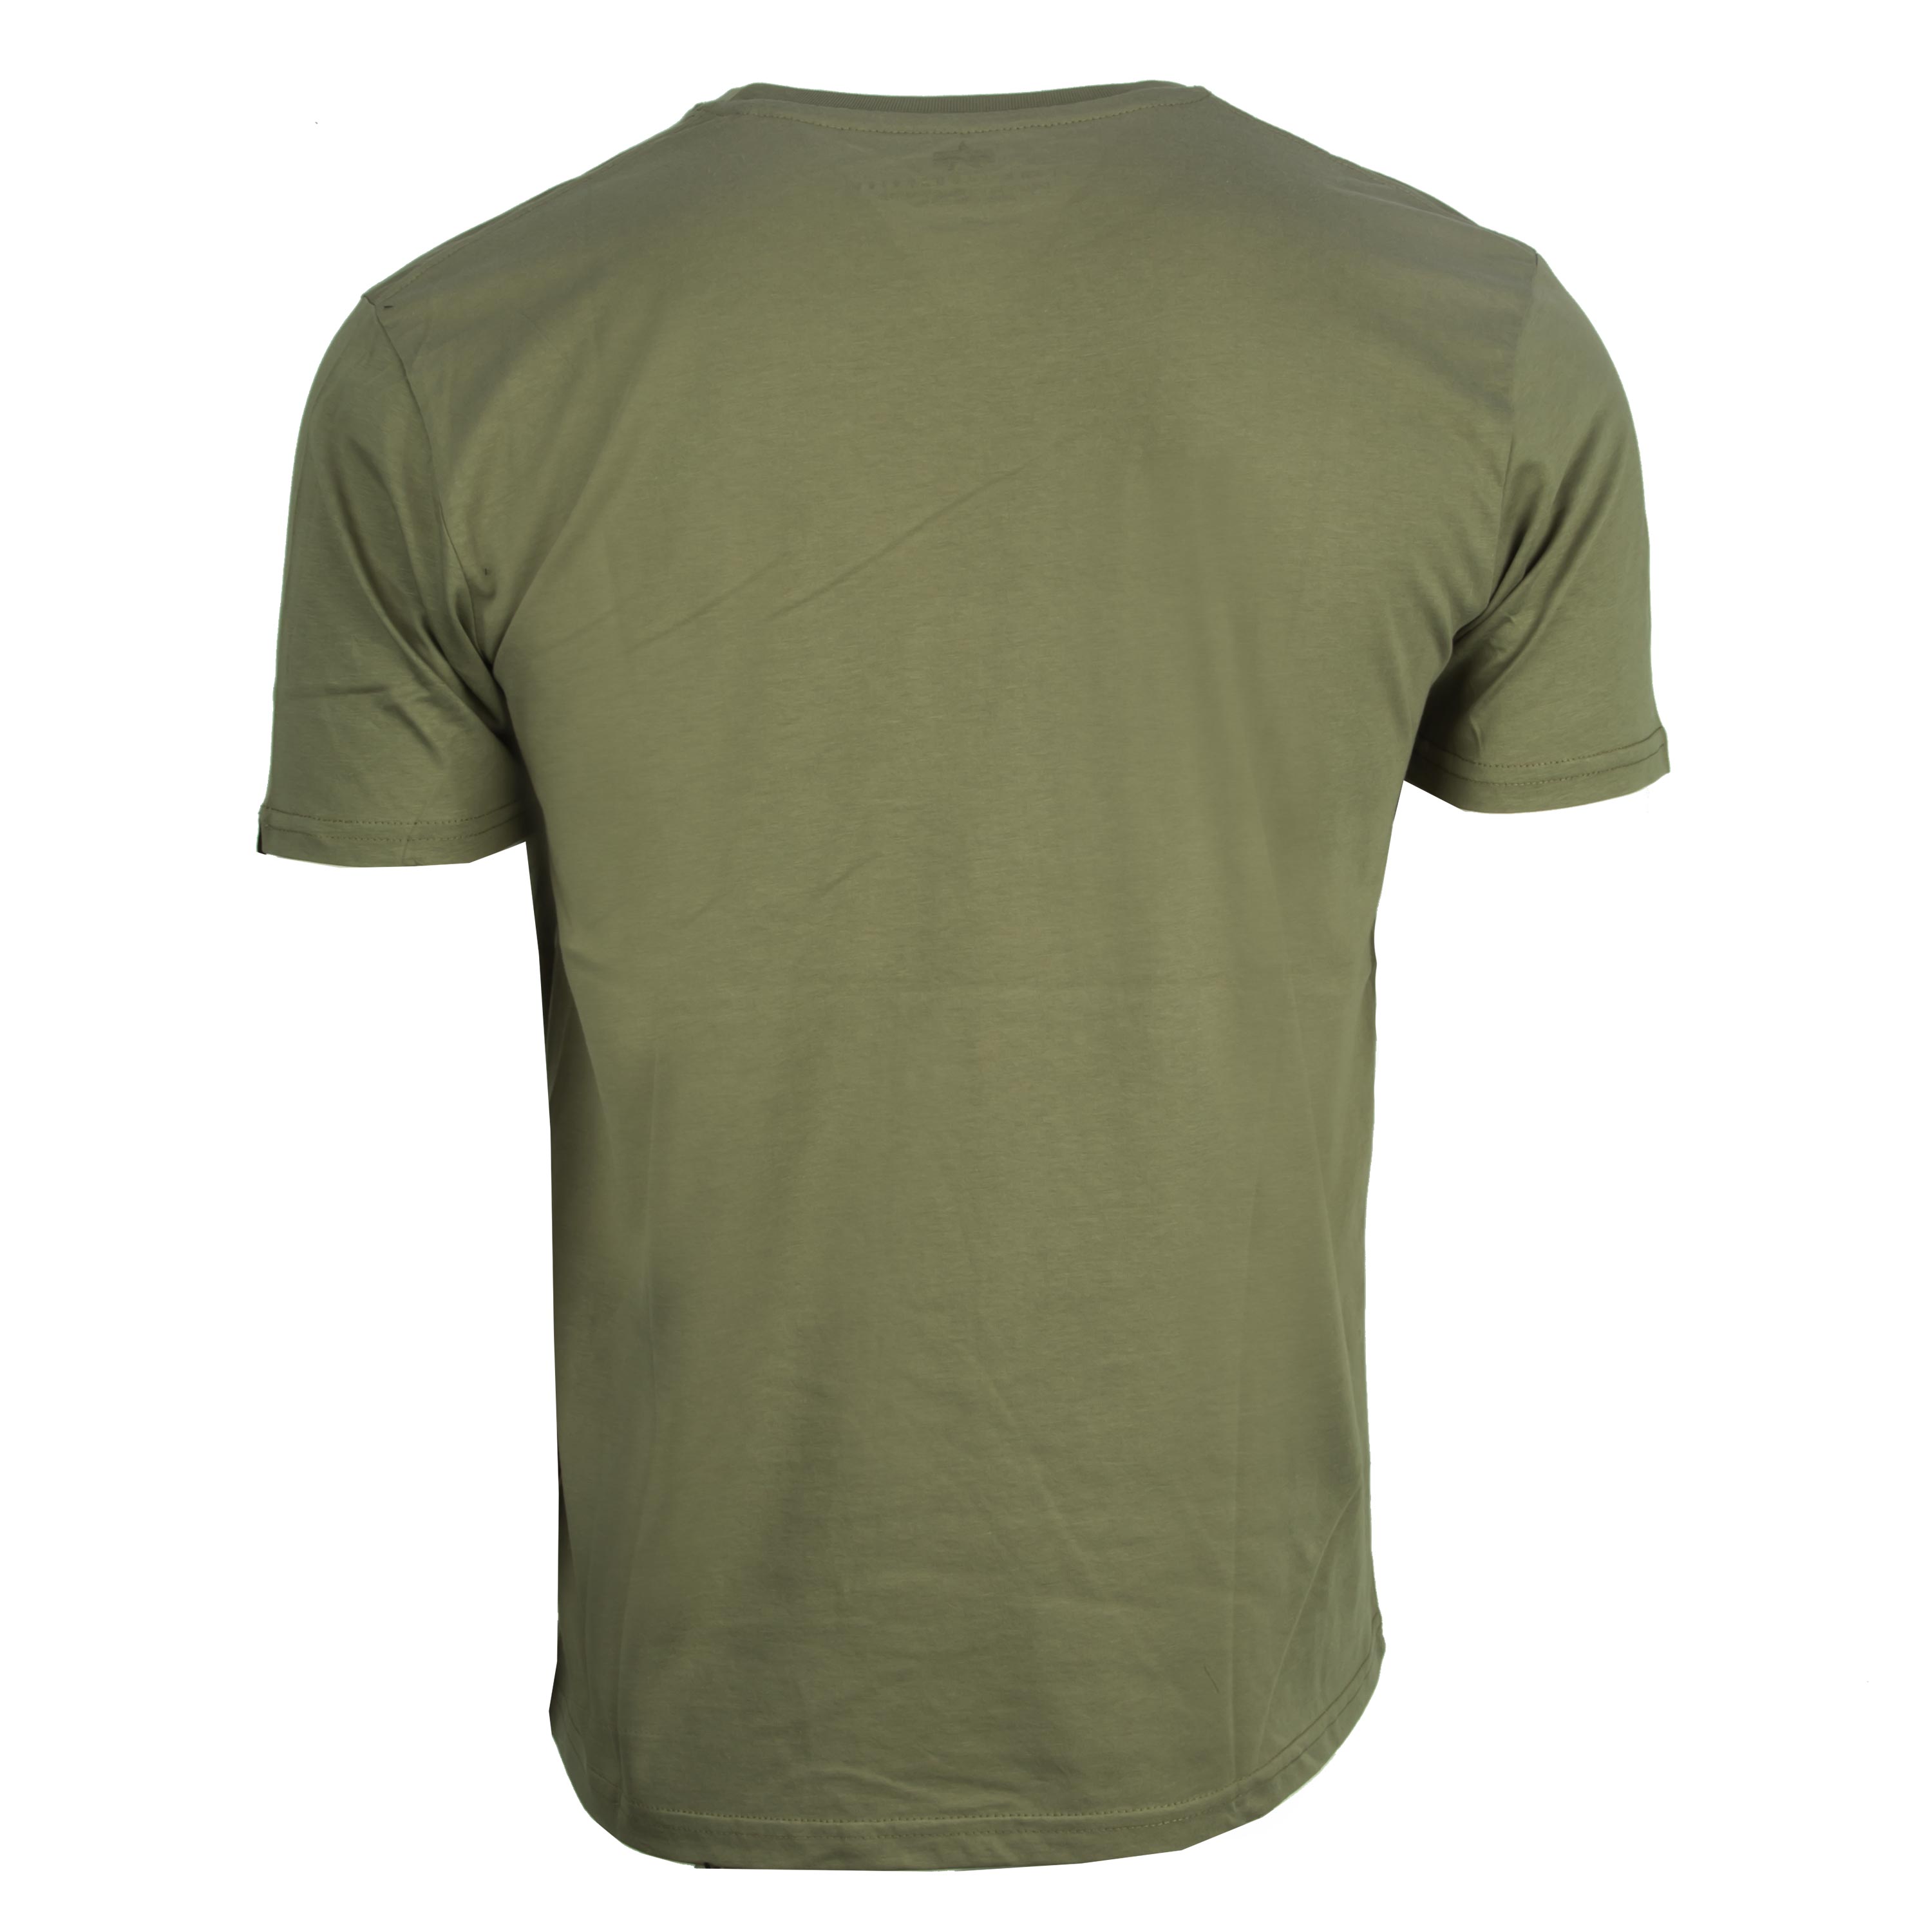 Purchase the Alpha T-Shirt by Industries ASMC olive T Basic